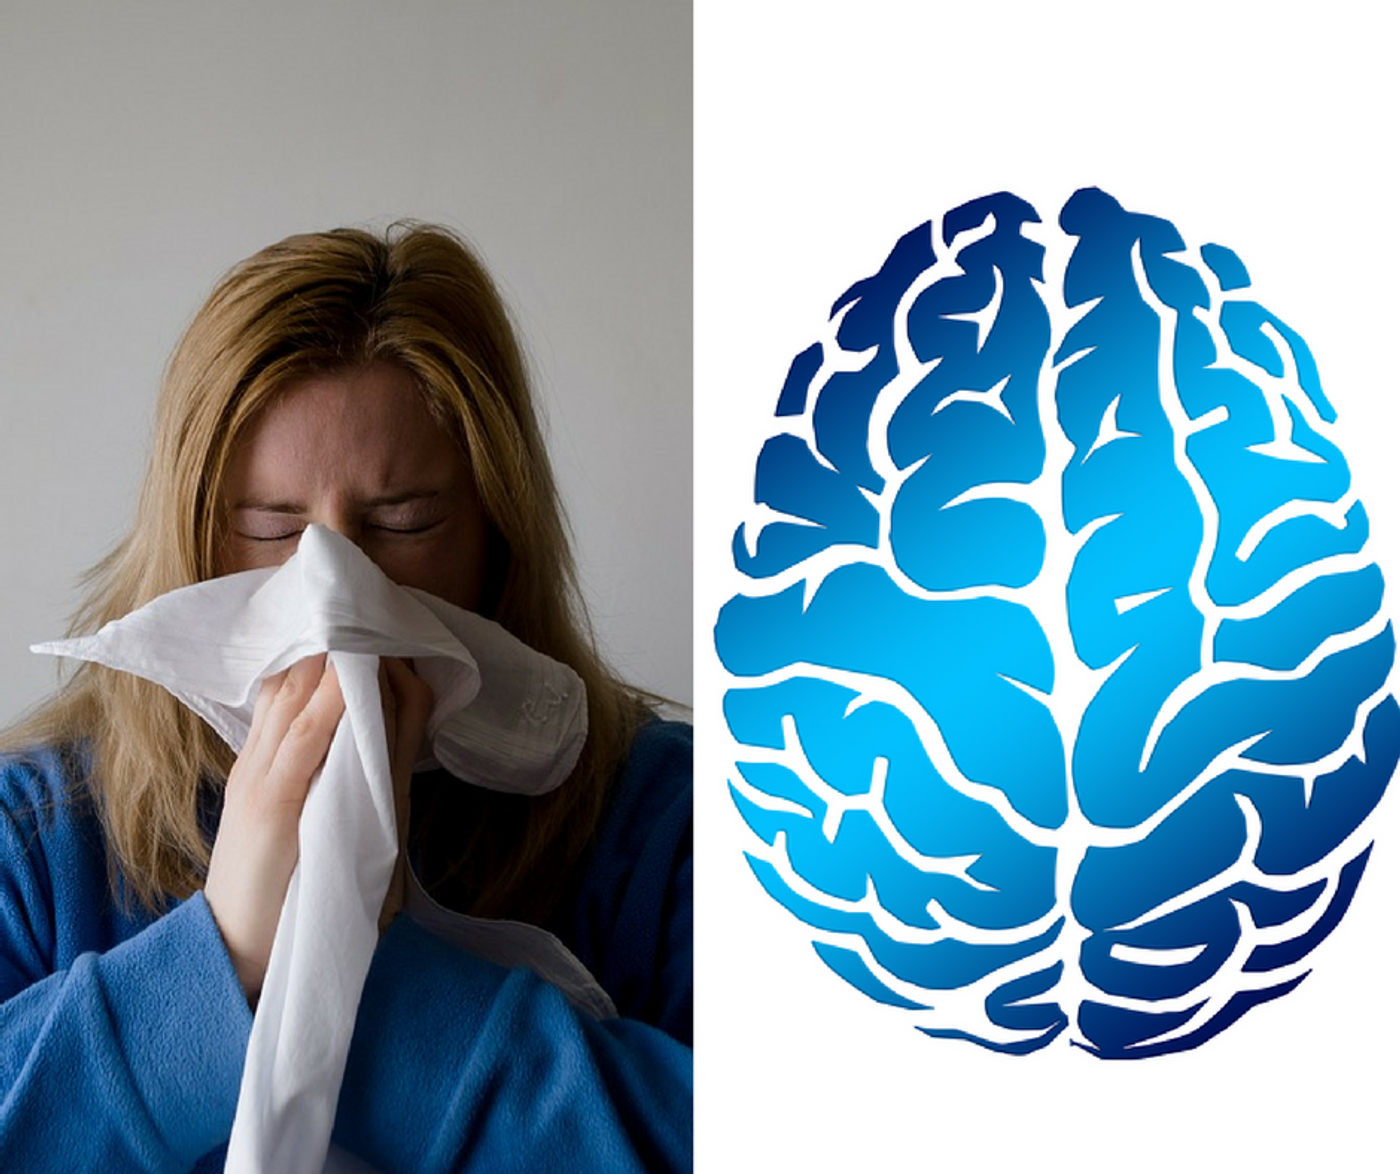 How are common allergic diseases linked to psychiatric disorders?